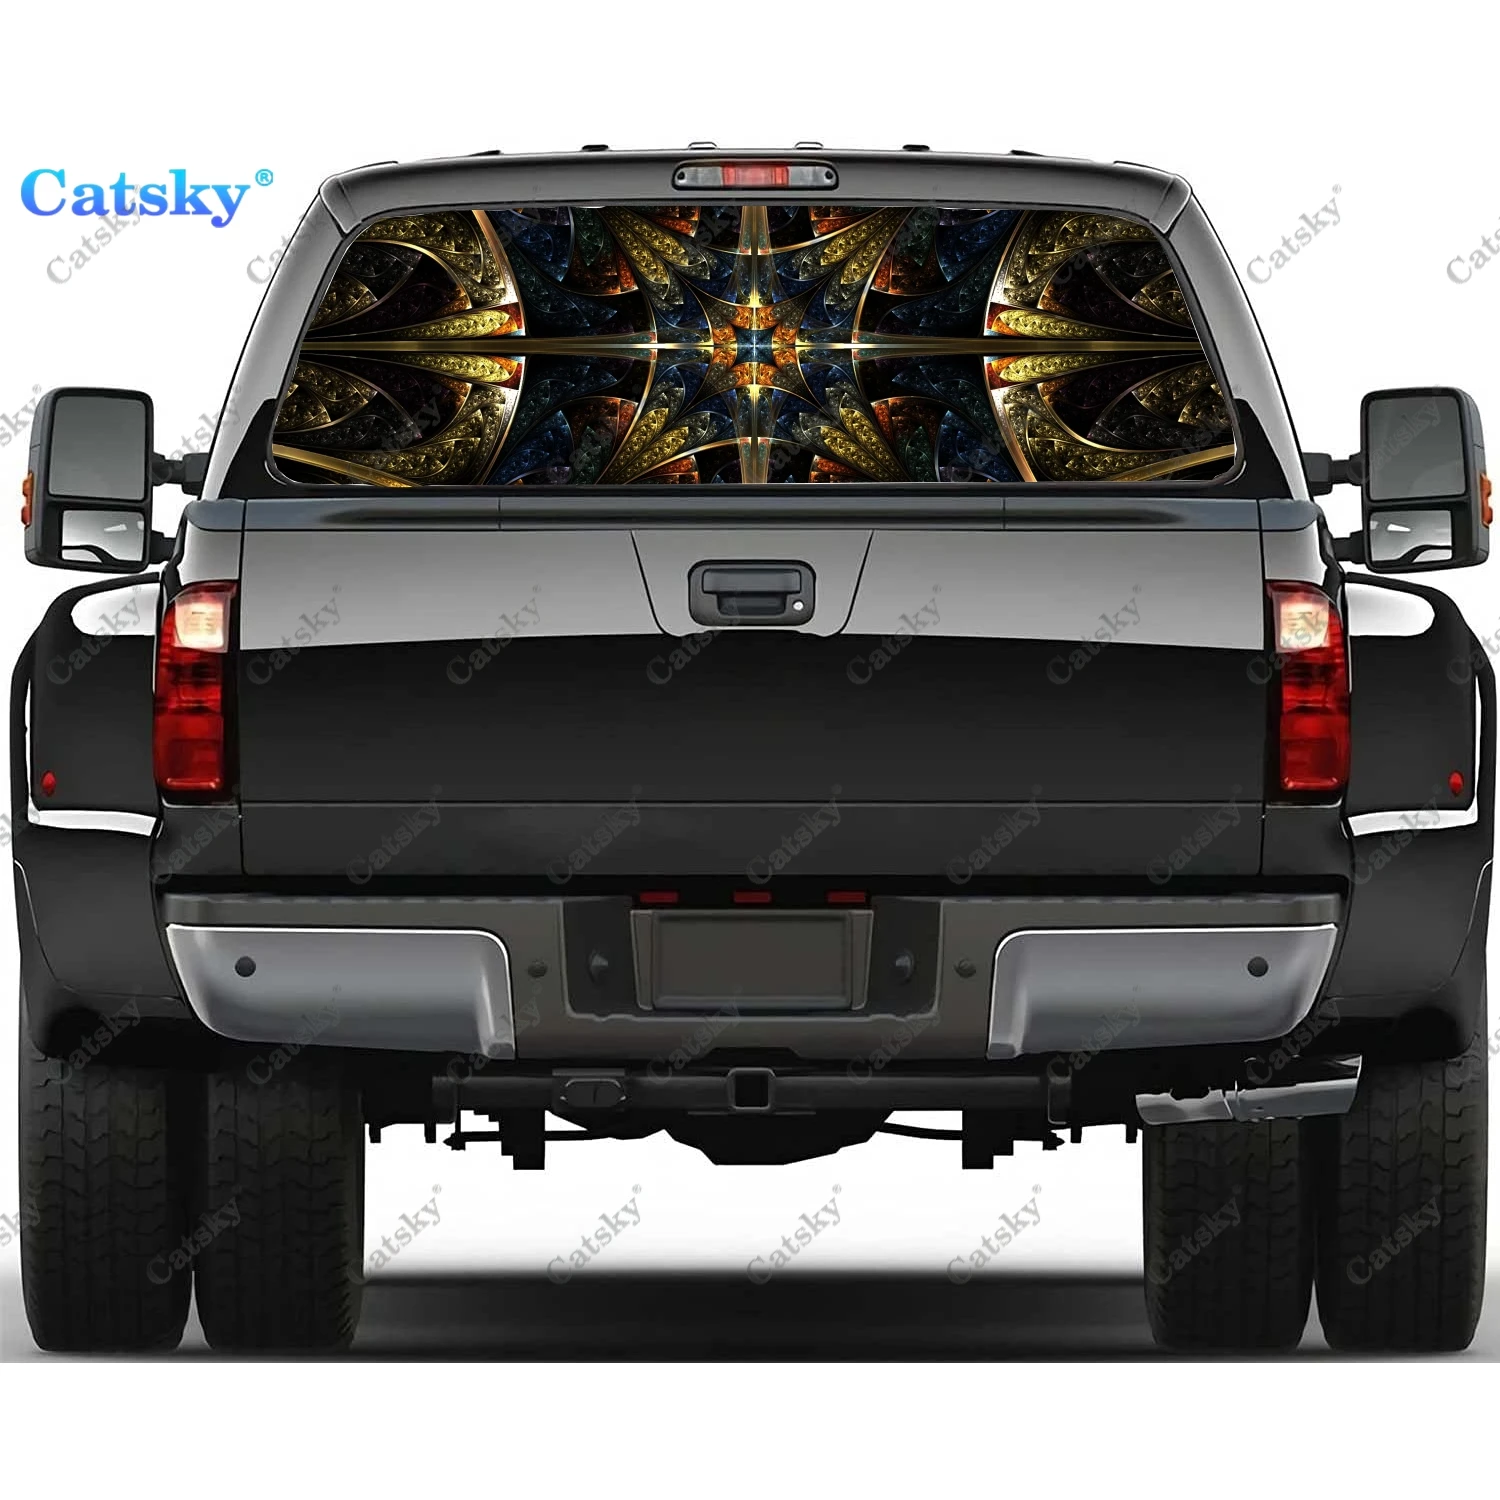 

Abstract Fractal Truck Rear Window Decal Sticker Graphic PVC Material Truck Sticker Perforated Vinyl Universal Sticker